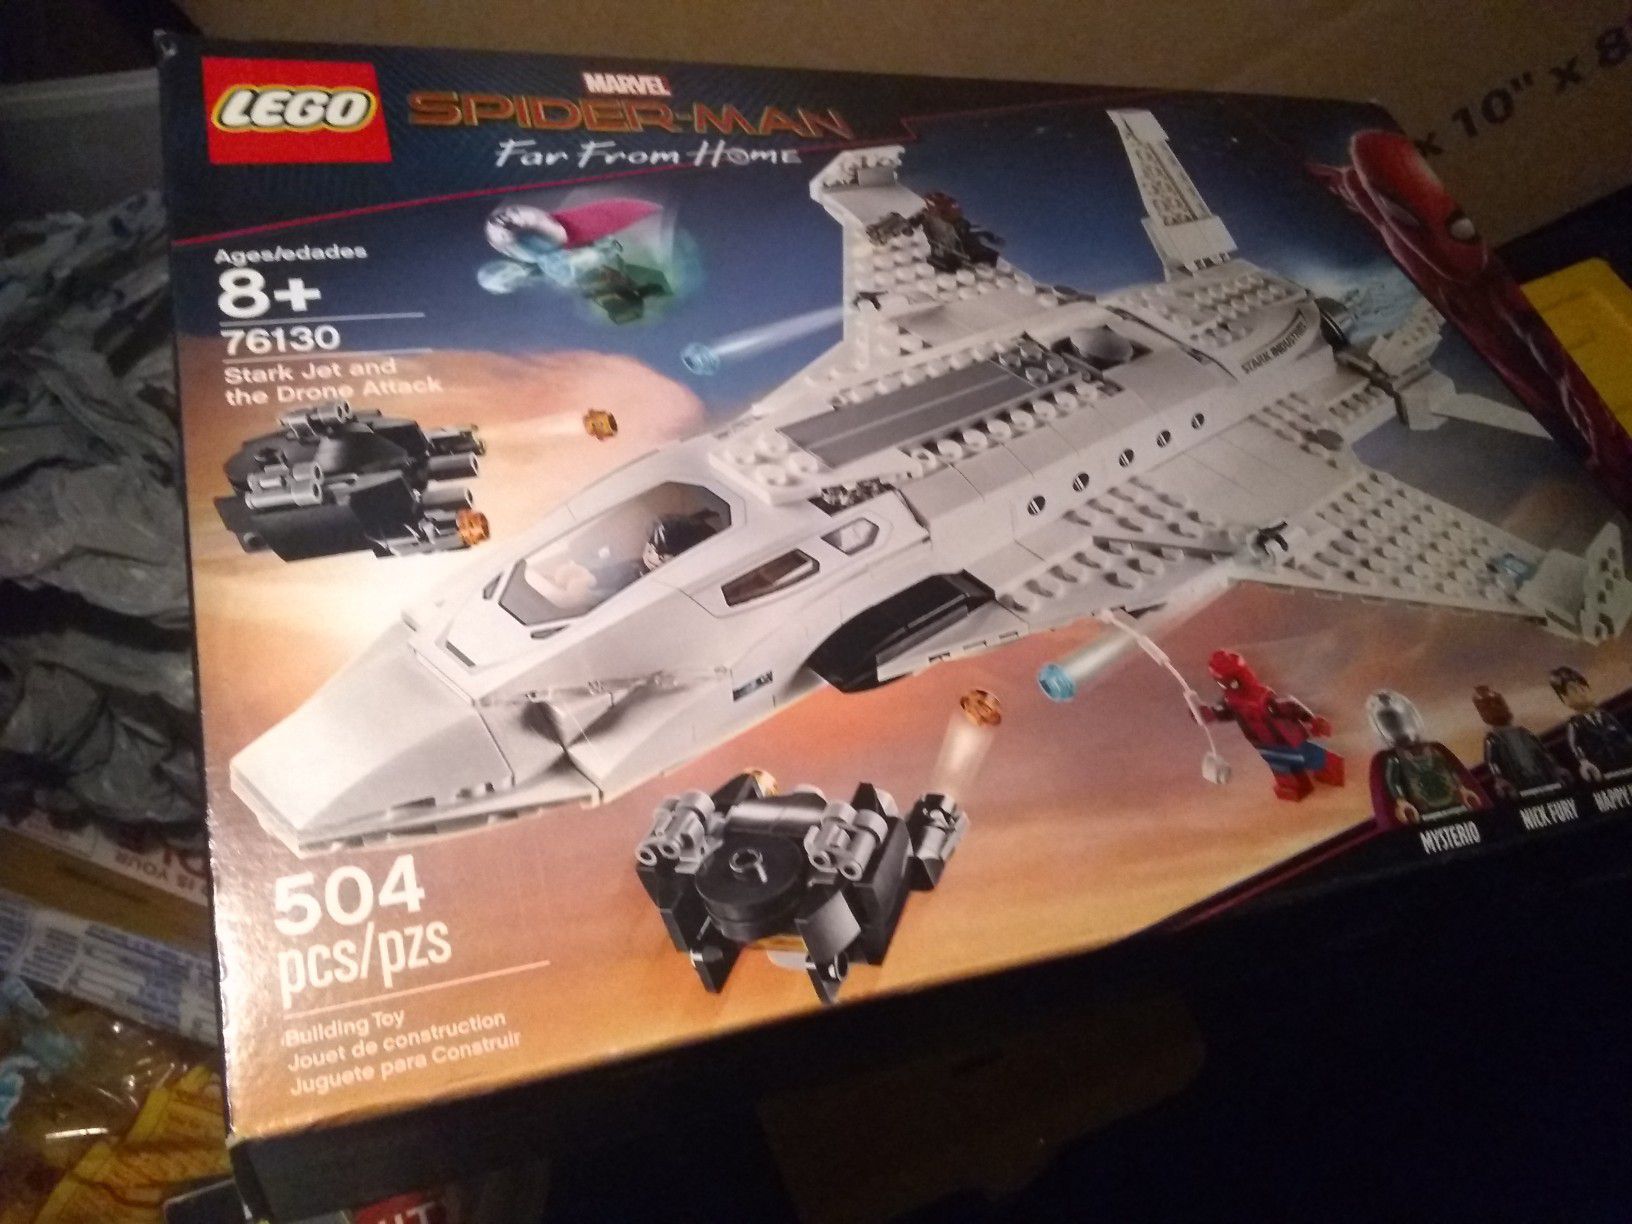 Legos Spiderman Set #76130 (504 pieces) "Stark Jet and the Drone Attack" For Sale Brand New! Only $30!